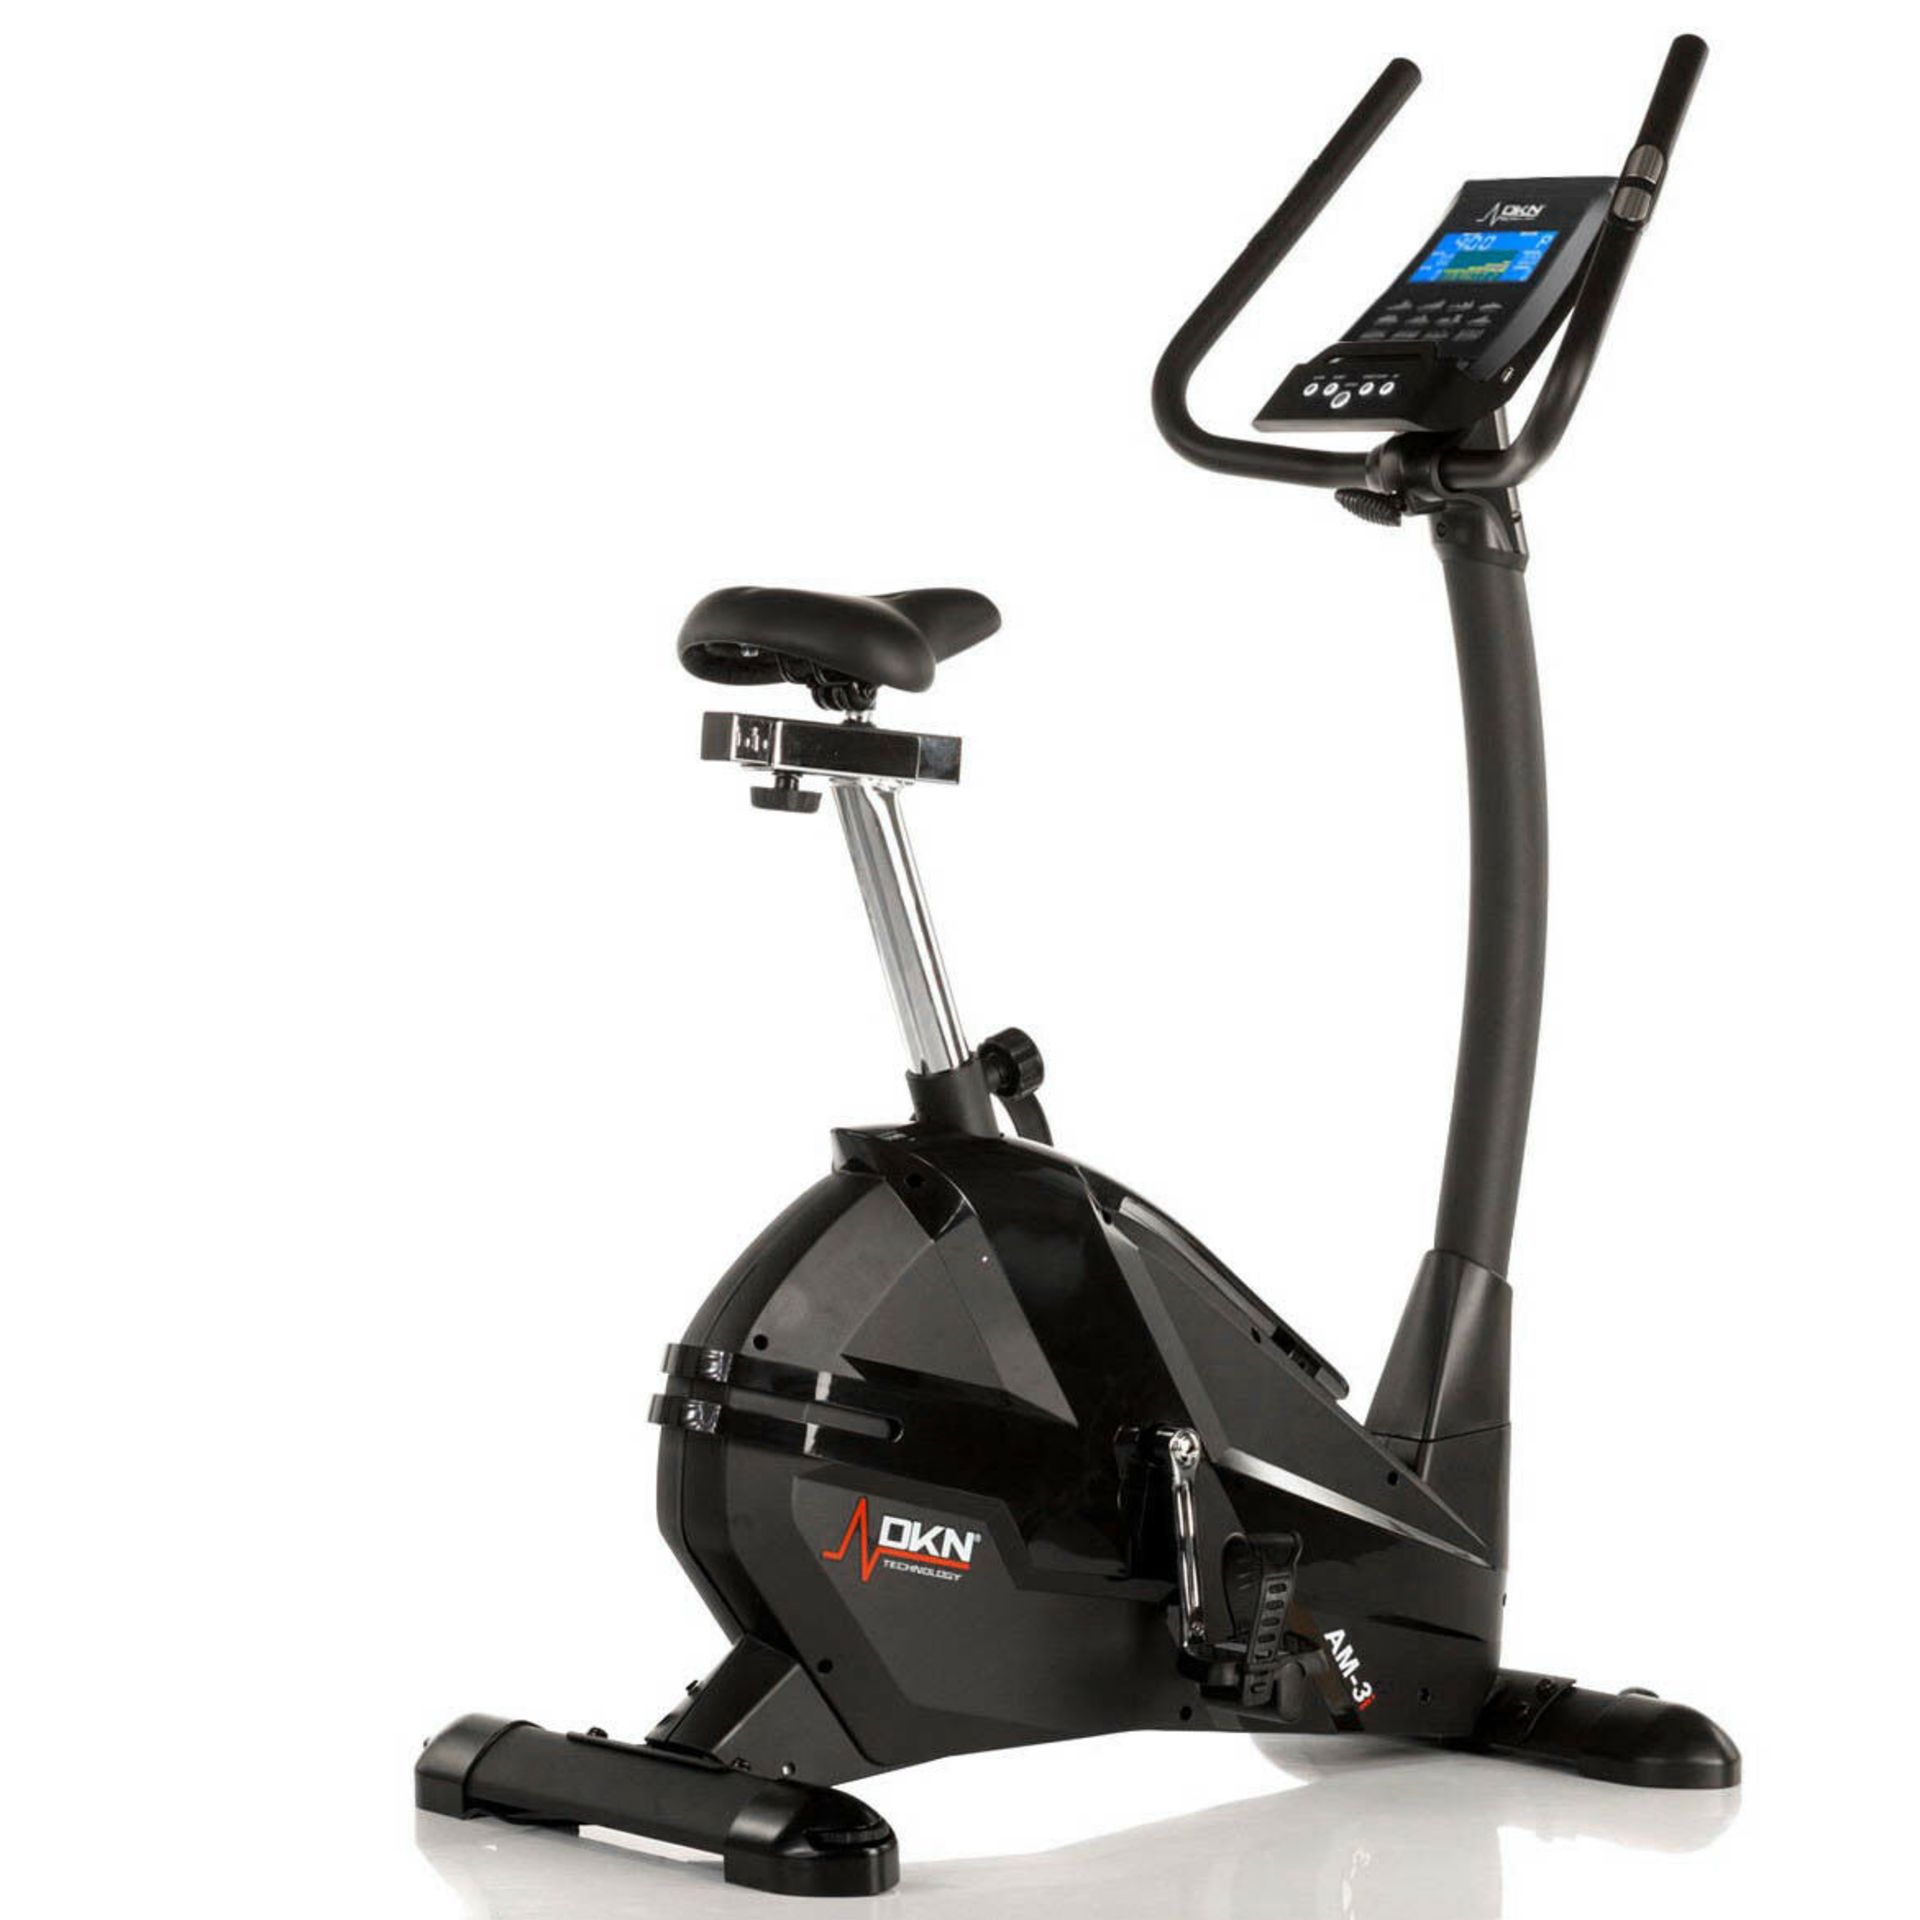 1 x Sweatband DKN AM-3i Exercise Bike black RRP œ369.00 This lot is a completely UNCHECKED. We